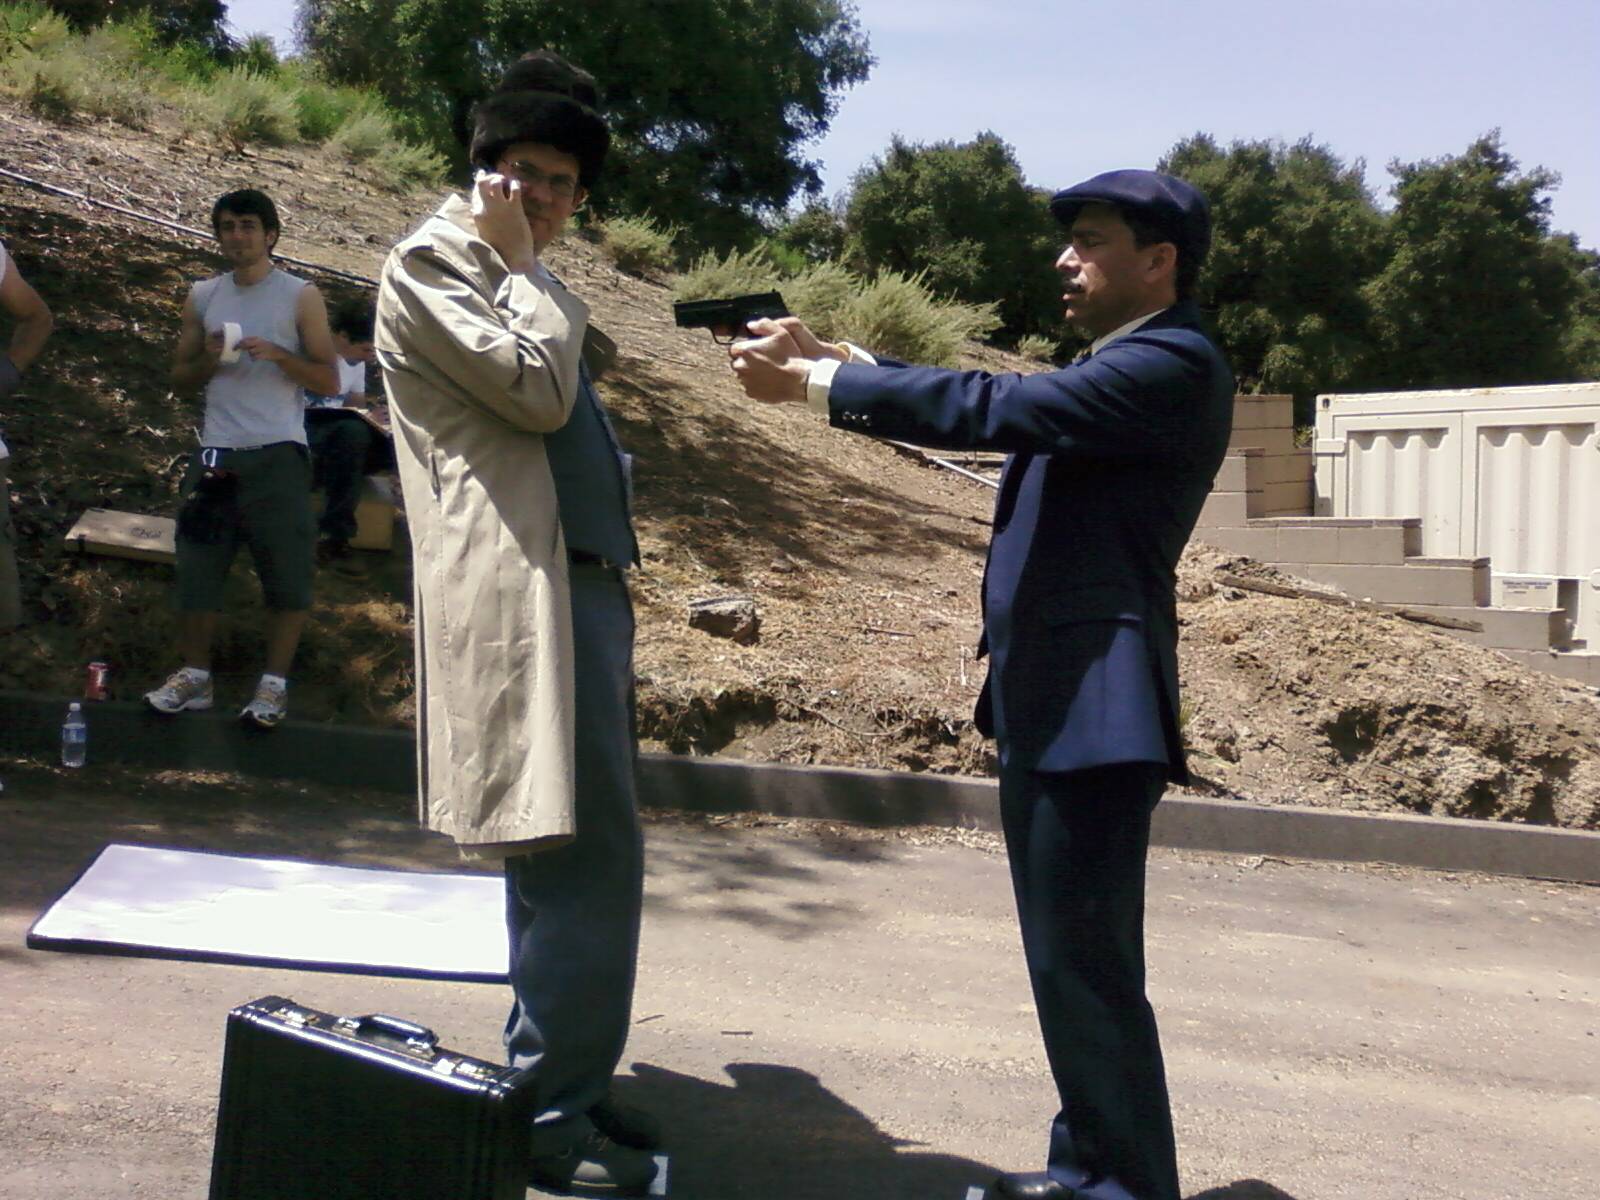 Michael Faulkner as Agent X and John Prudhont as The Plague during filming of Agent X: The First Mission